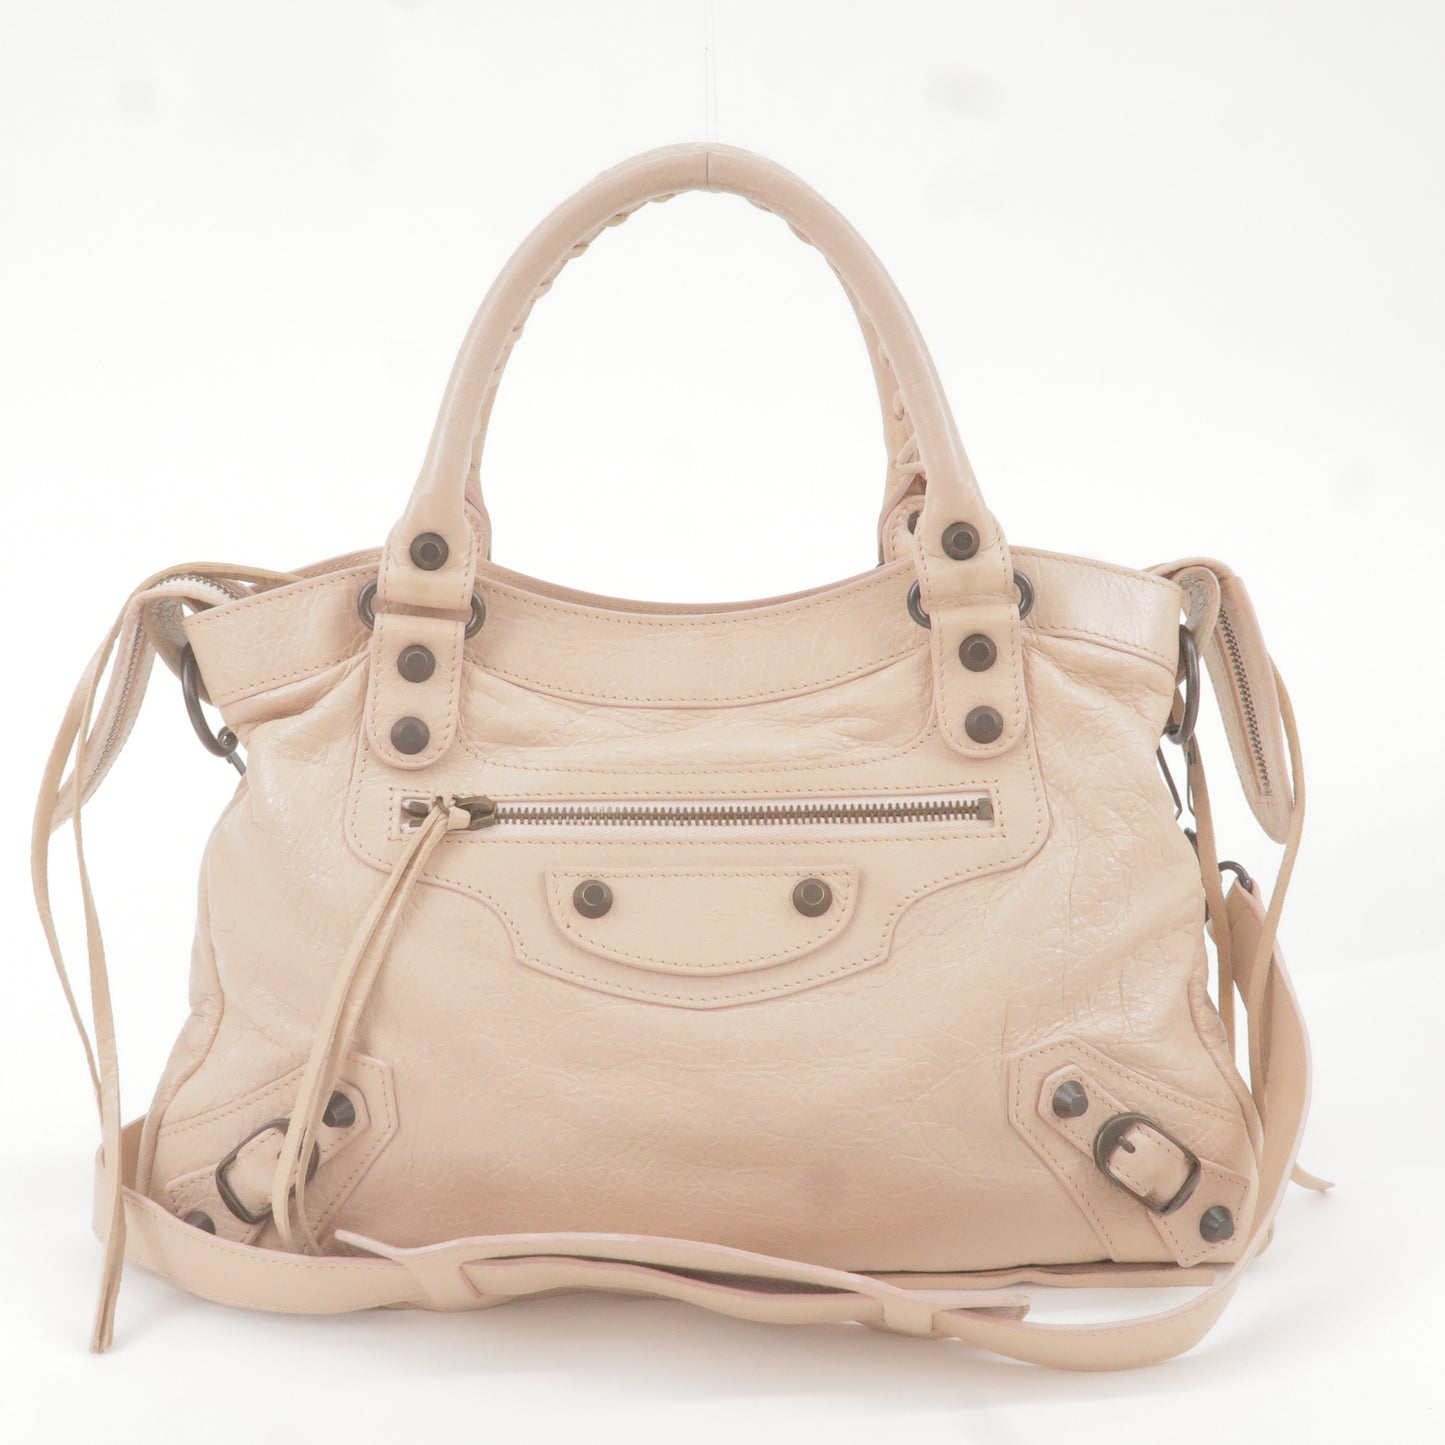 BALENCIAGA The Town Leather 2Way Hand Bag Pink Beige 240579